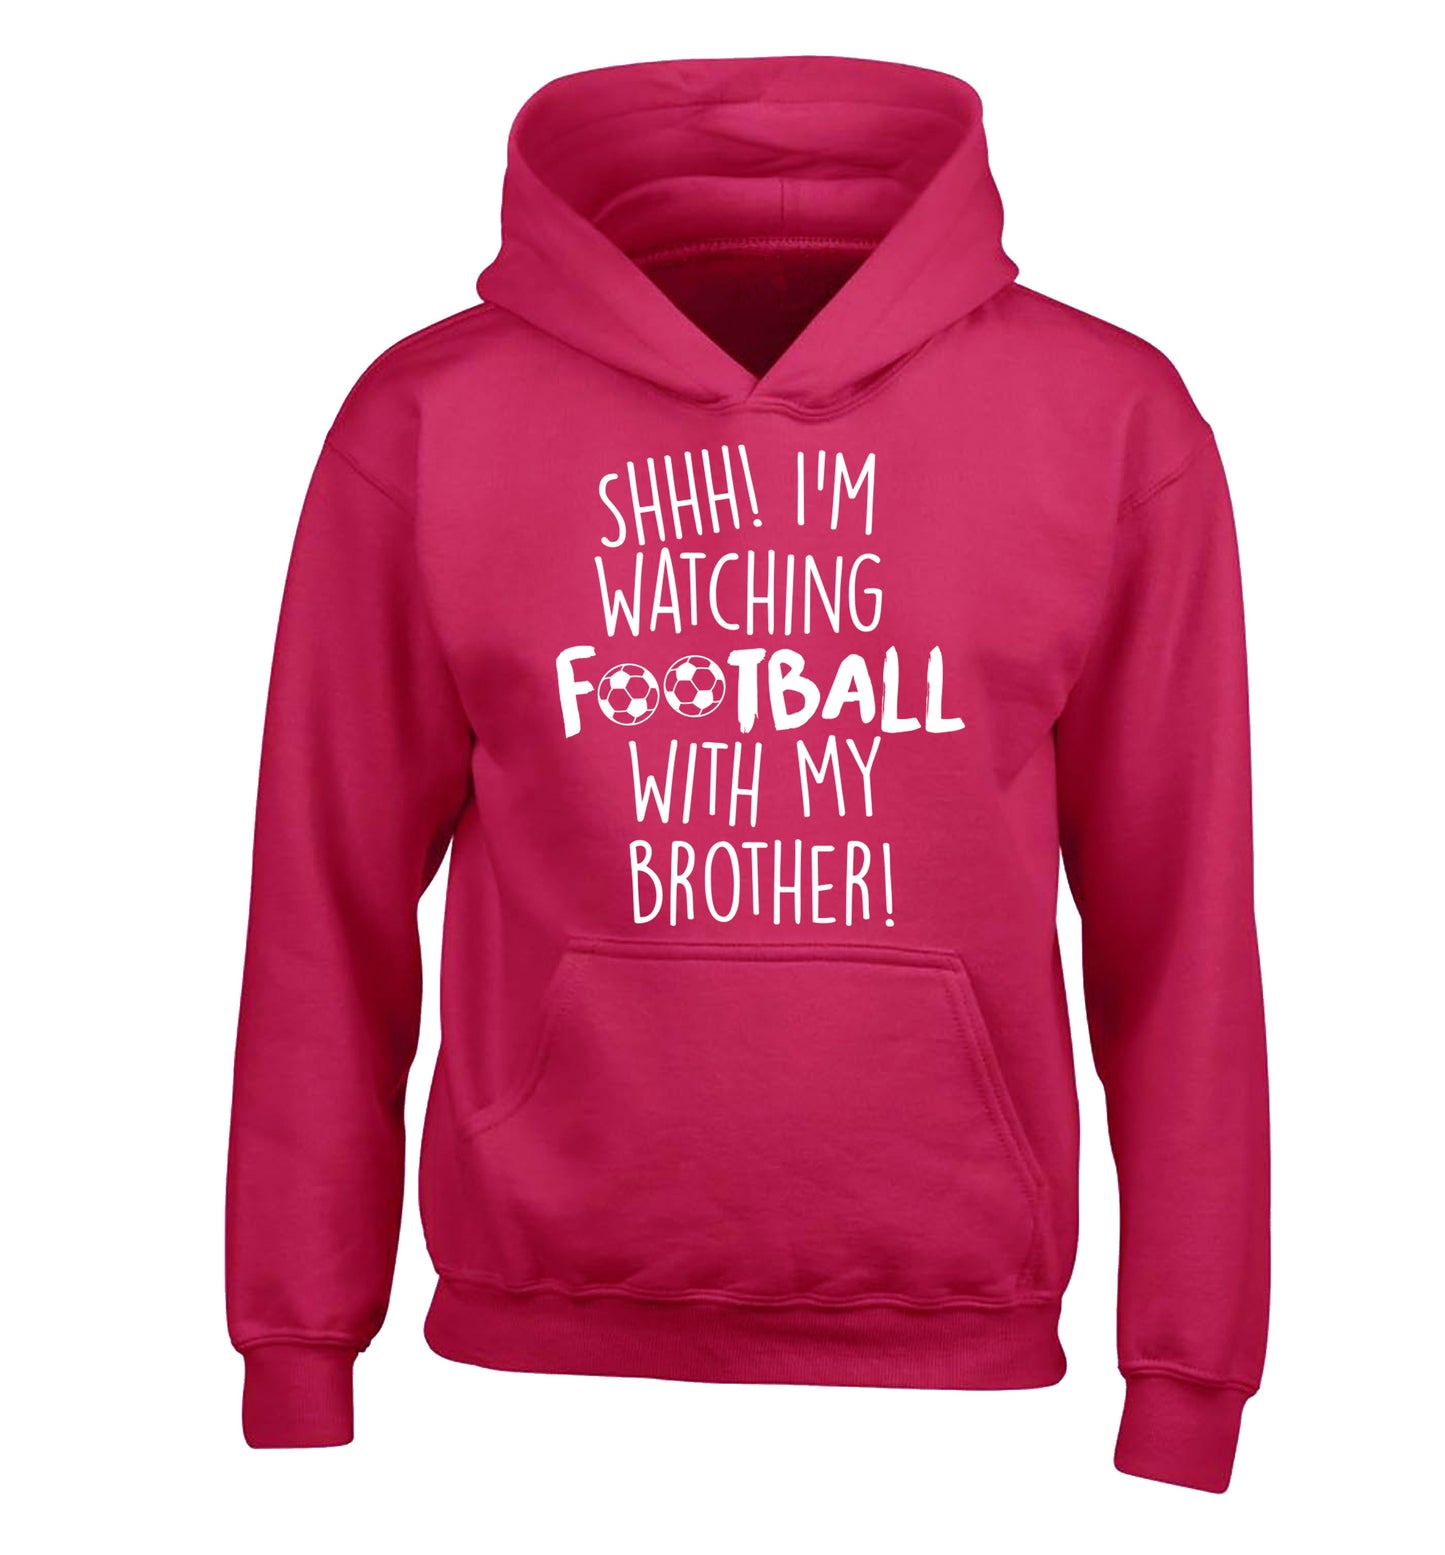 Shhh I'm watching football with my brother children's pink hoodie 12-14 Years